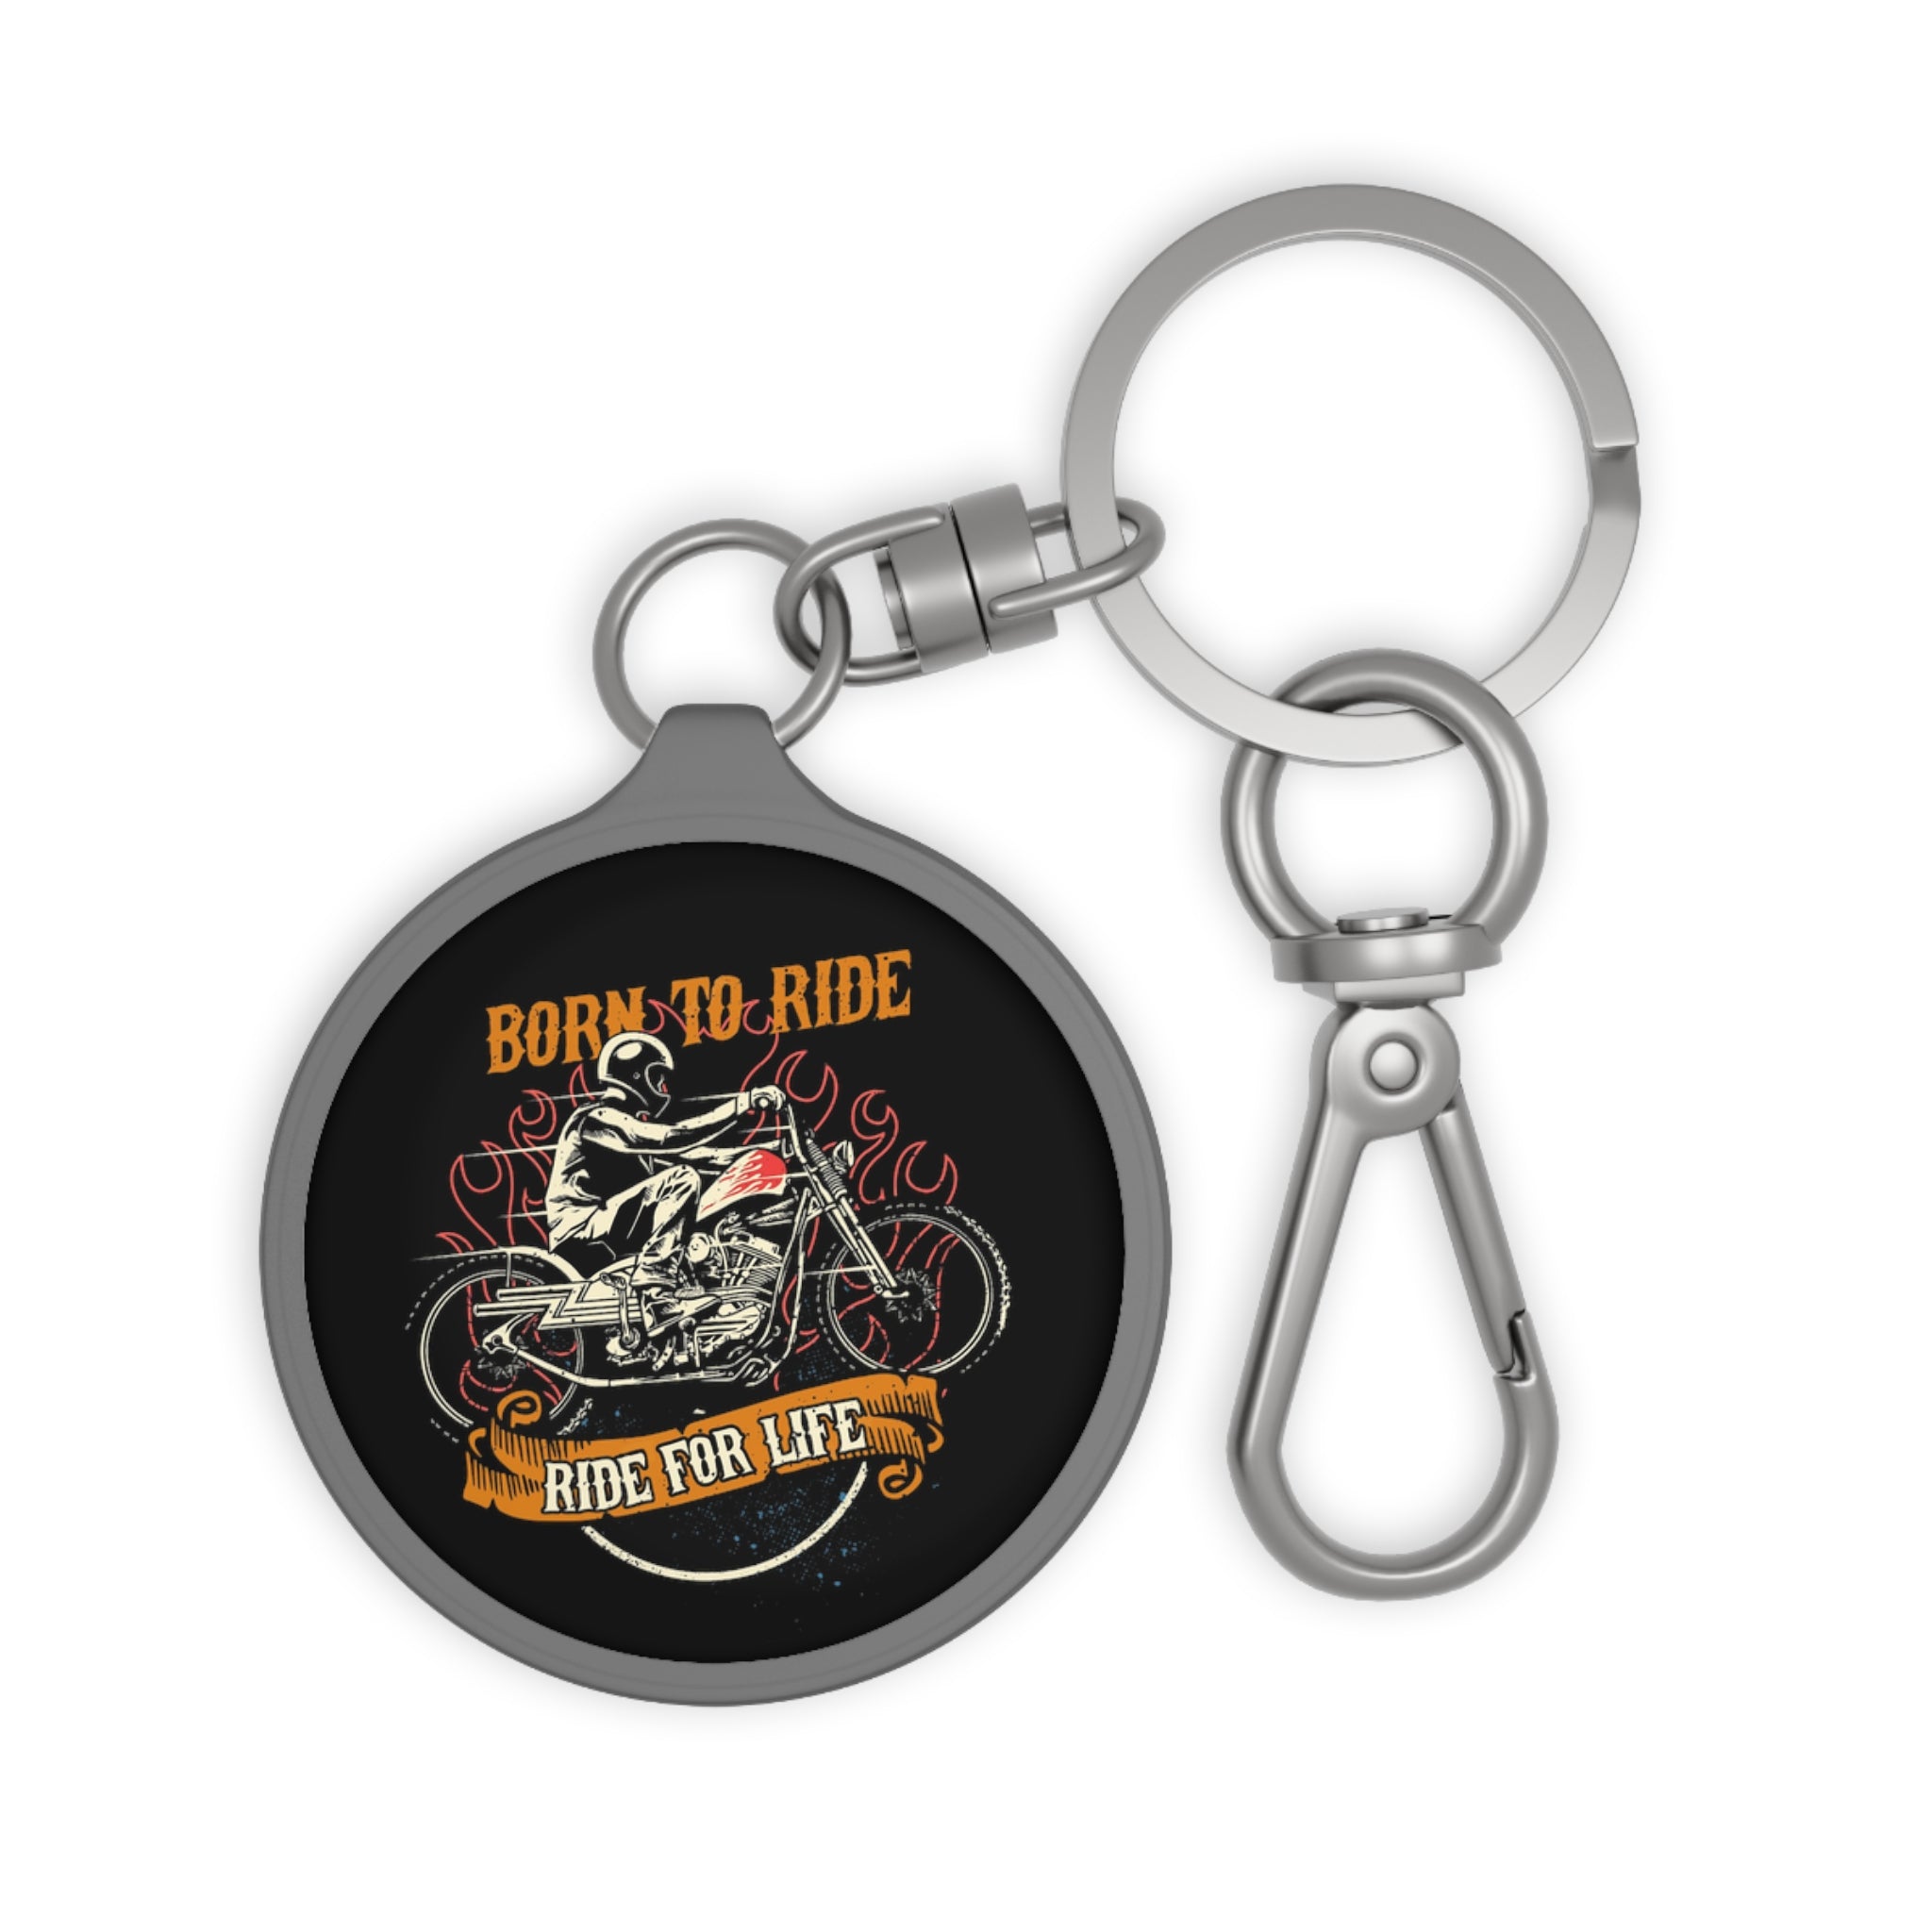 Motorcycle Keyring tag featuring a motorcycle design, perfect for motorcycle enthusiasts and riders.